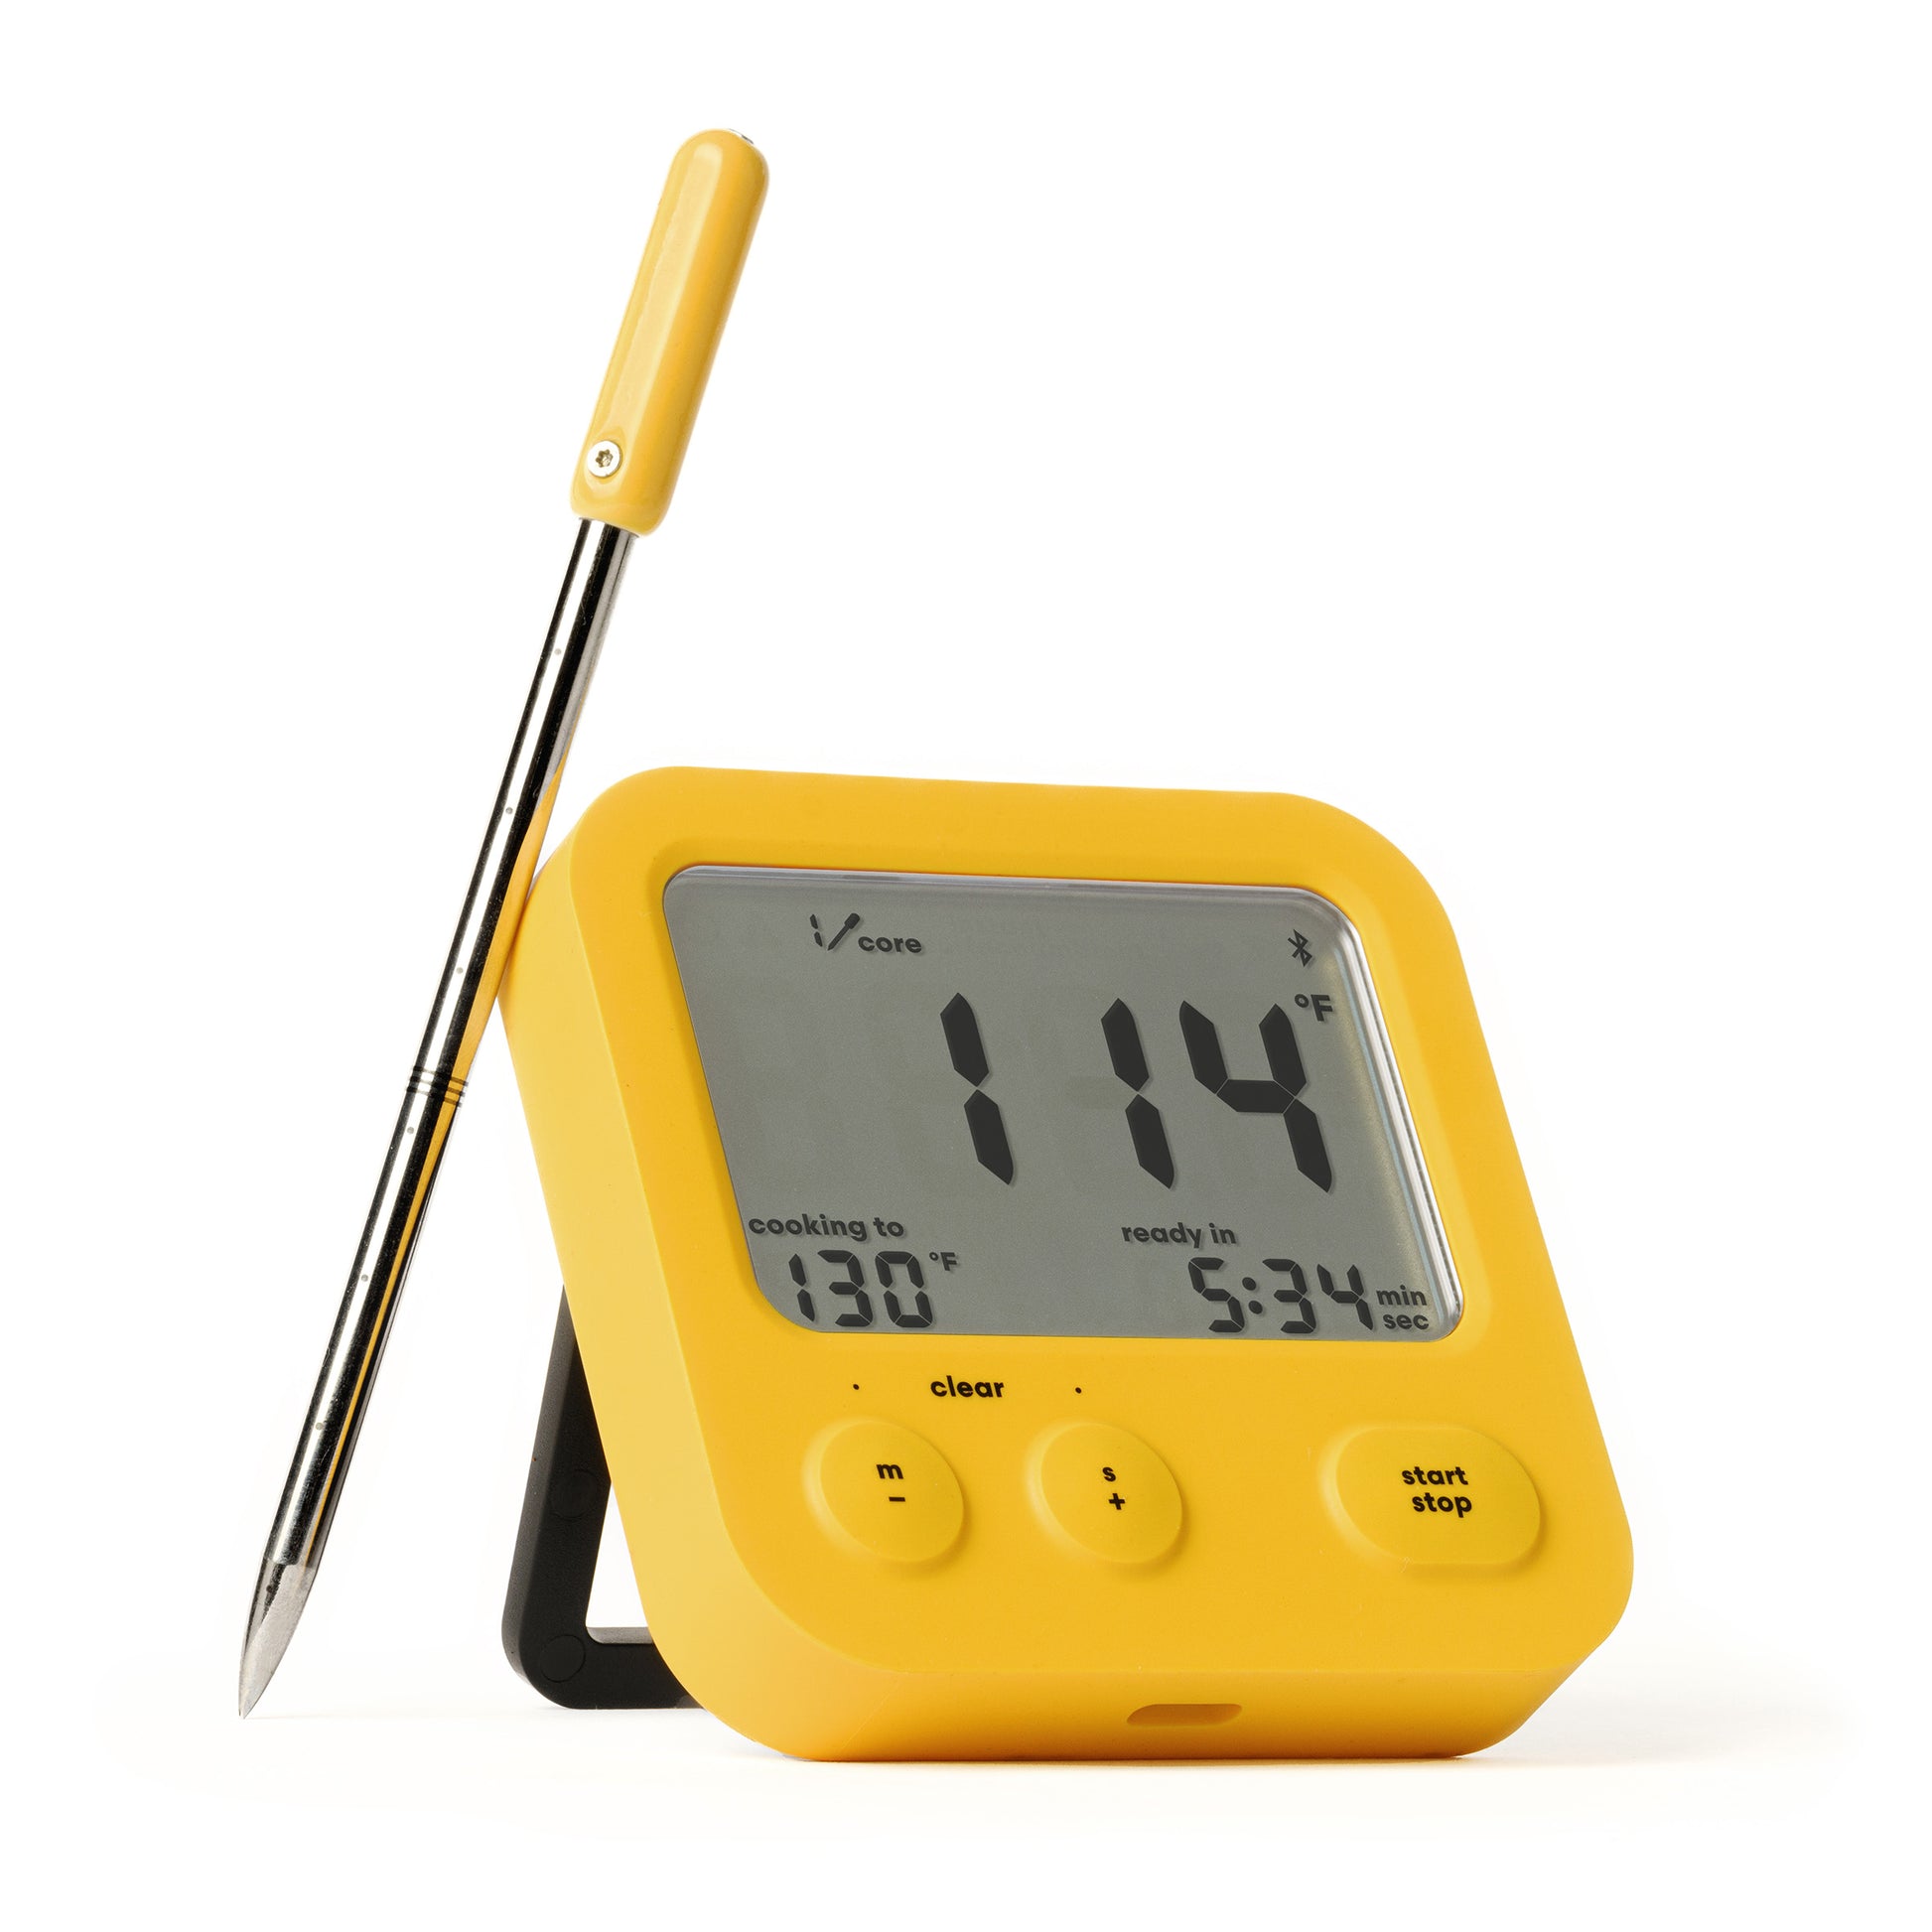 Smart Thermometer Cooking, Oven Thermometer Smart Cook